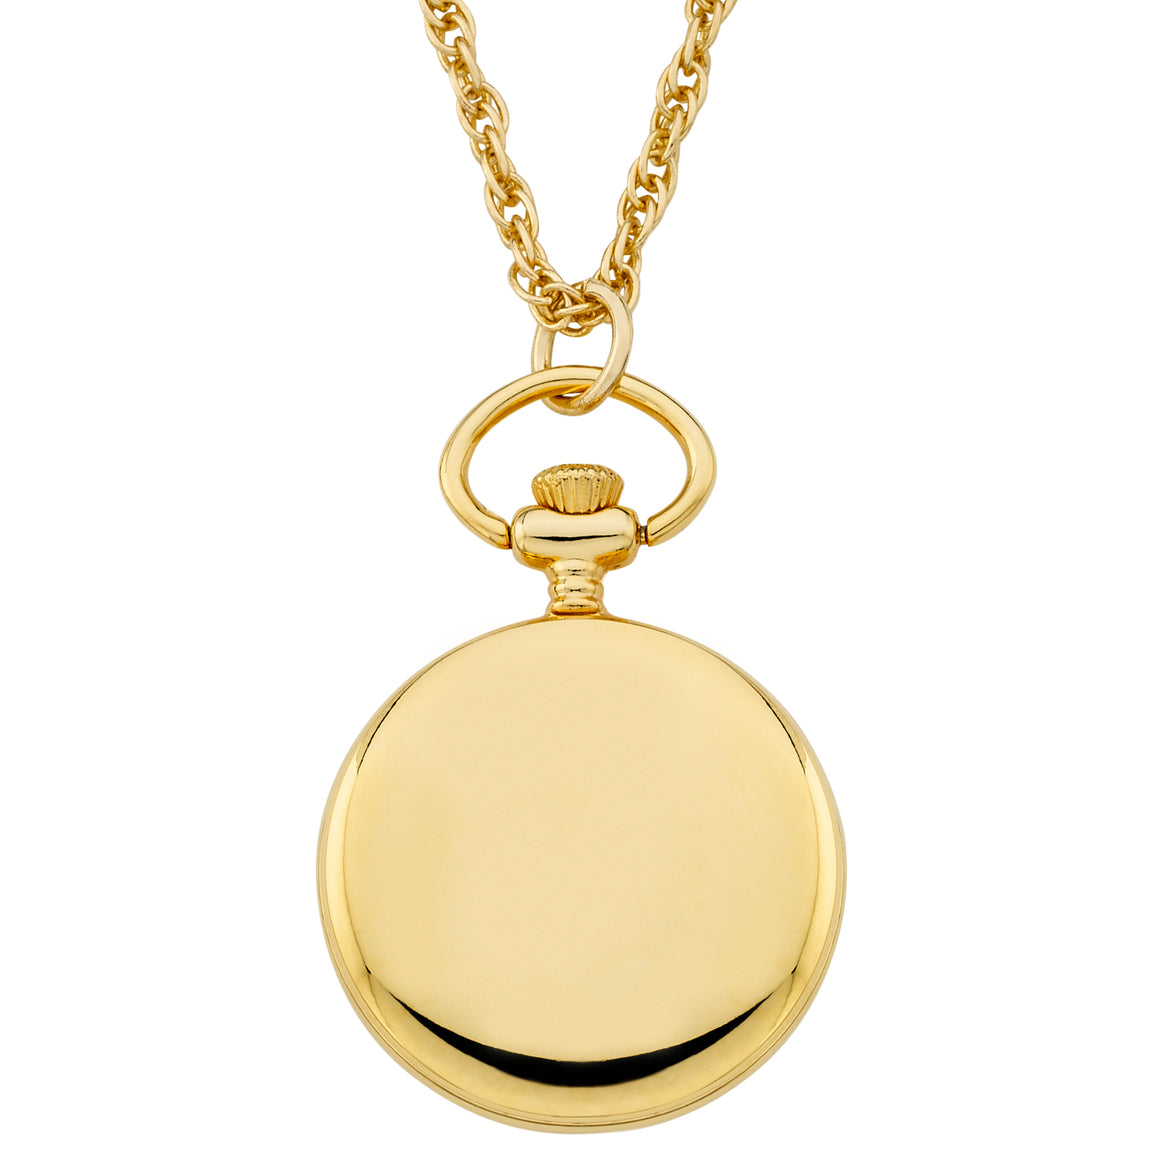 Gotham Women's Gold-Tone Open Face Pendant Watch with Chain # GWC14139GR